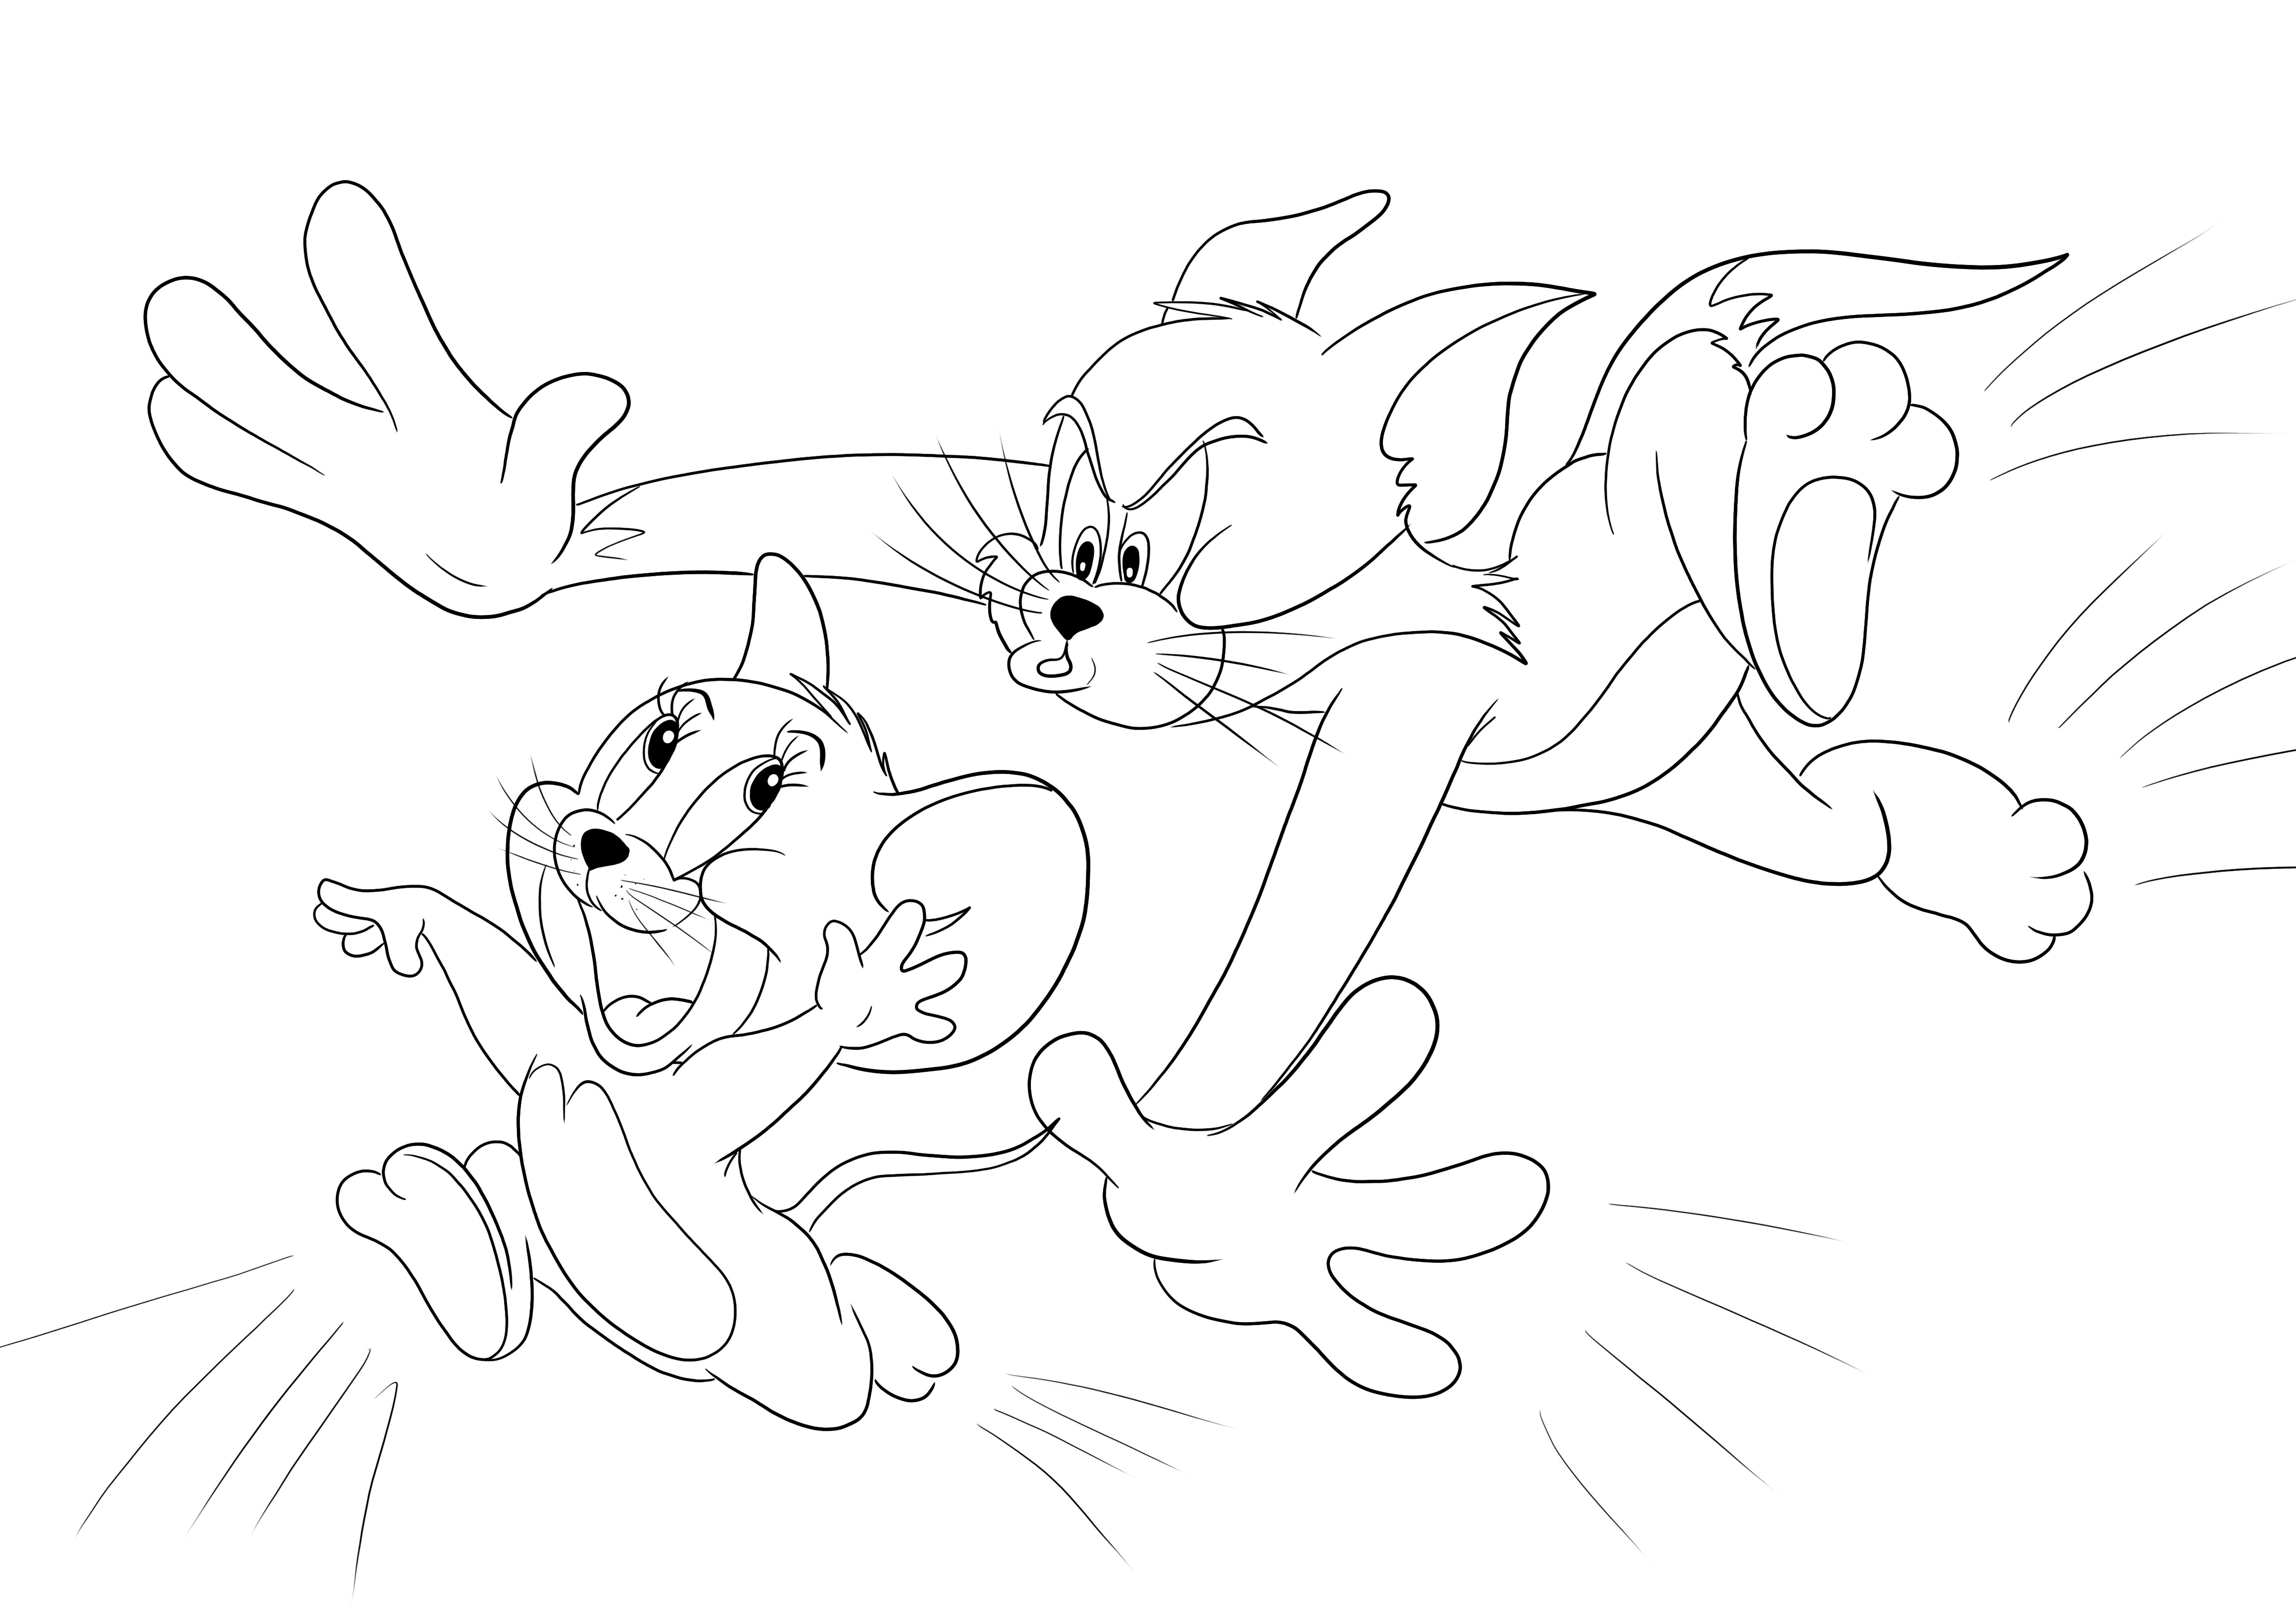 Tom chasing Jerry coloring for fun and printing or downloading for free